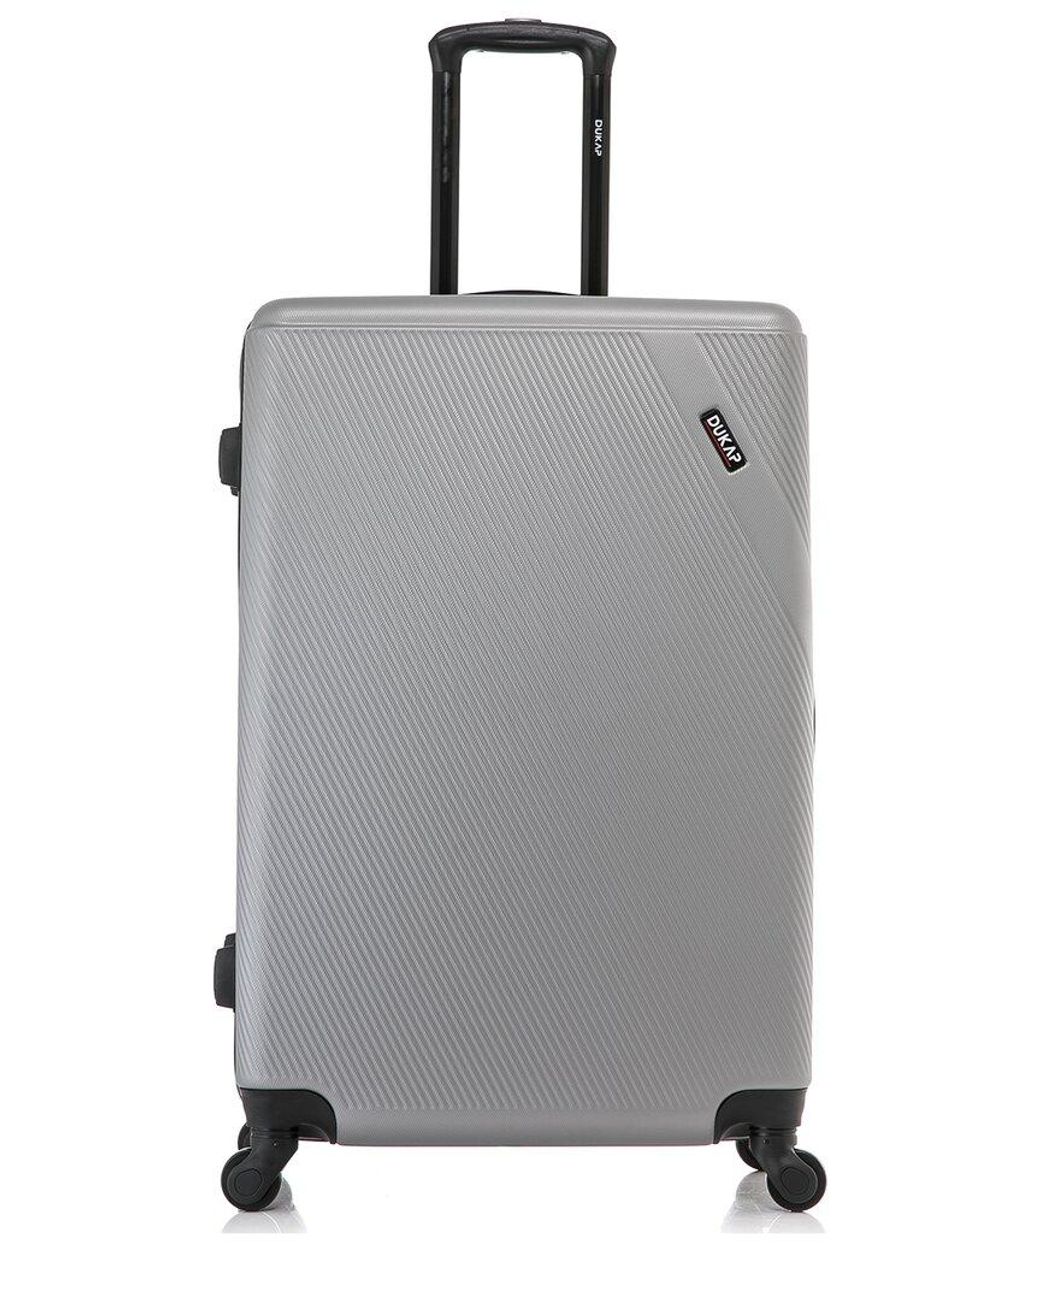 DUKAP Inception Lightweight Hardside Spinner 28in in Silver Metallic Womens Bags Luggage and suitcases 